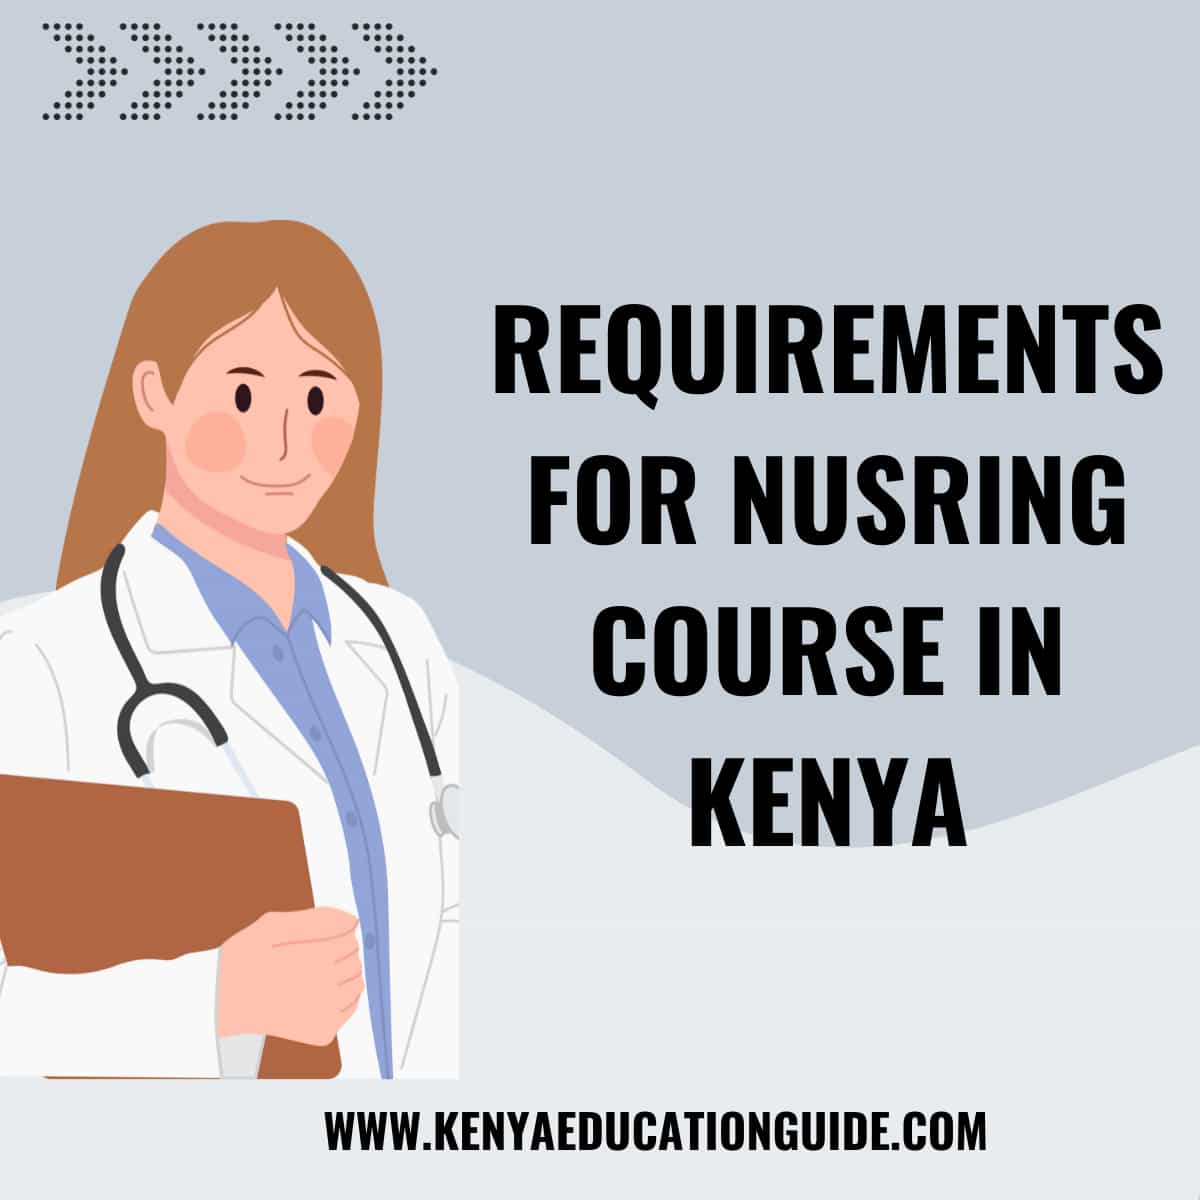 Requirements for Nursing Course in Kenya